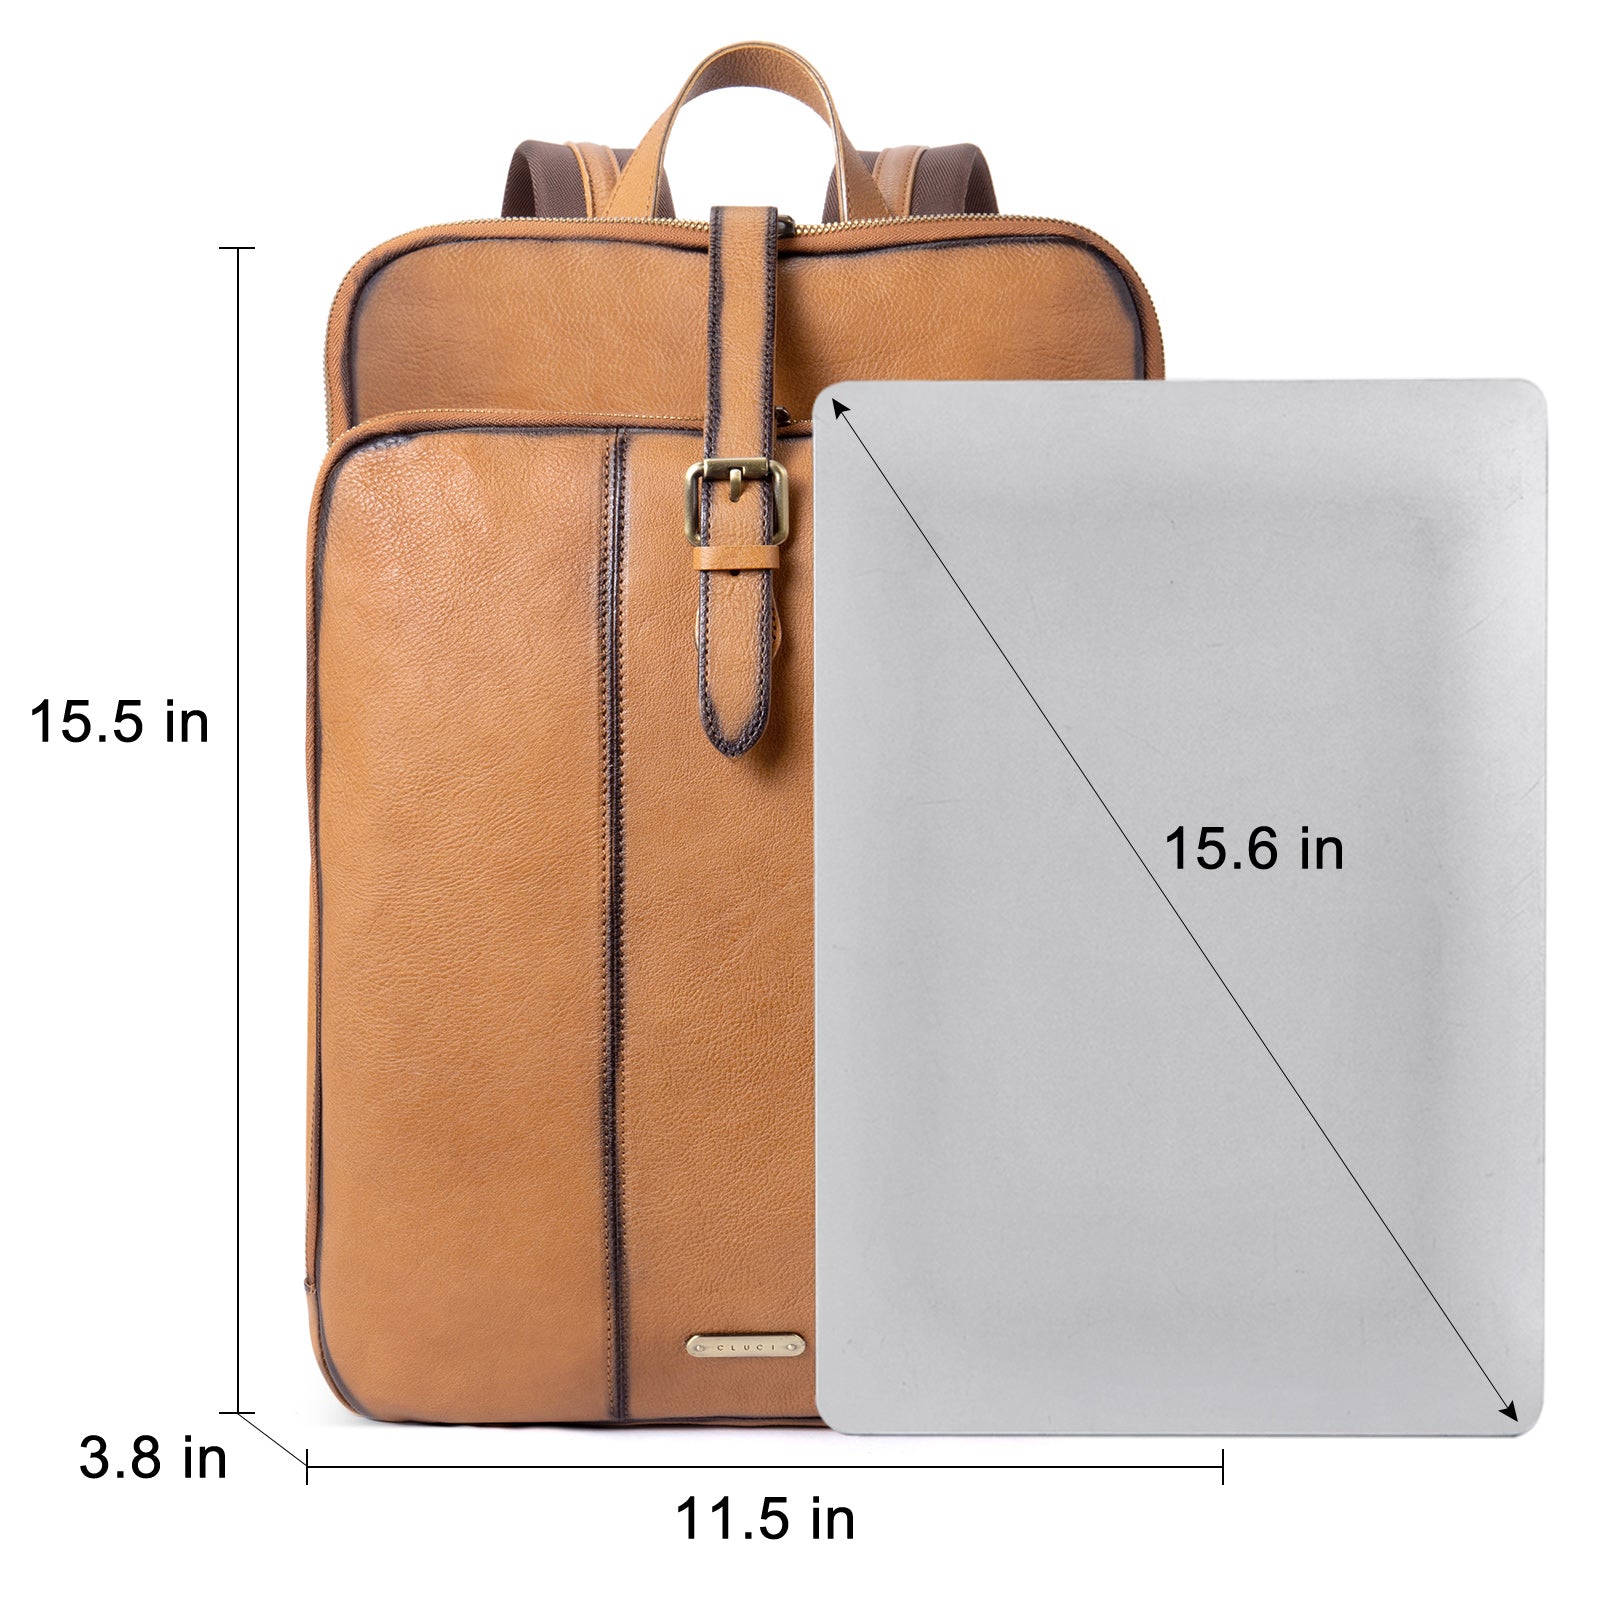 CLUCI Leather Laptop Backpack for Women Vegetable Tanned Full Grain Leather 15.6 inch Computer Bag Travel Business Daypack